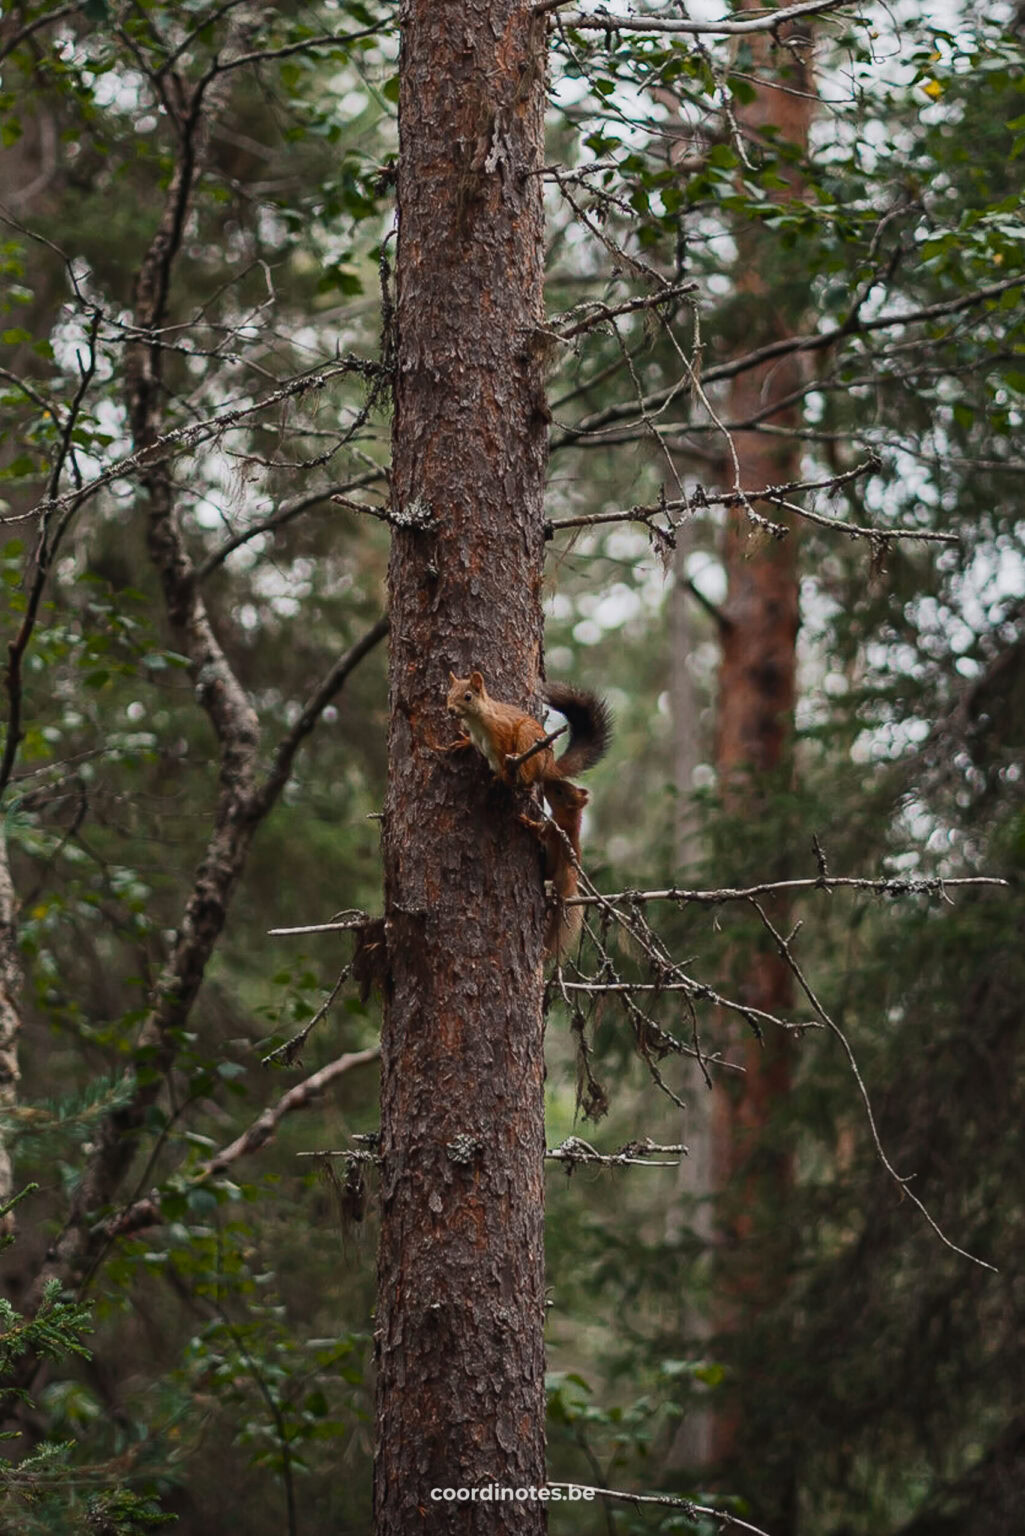 One of the many squirrels we saw when we went hiking in Lapland.